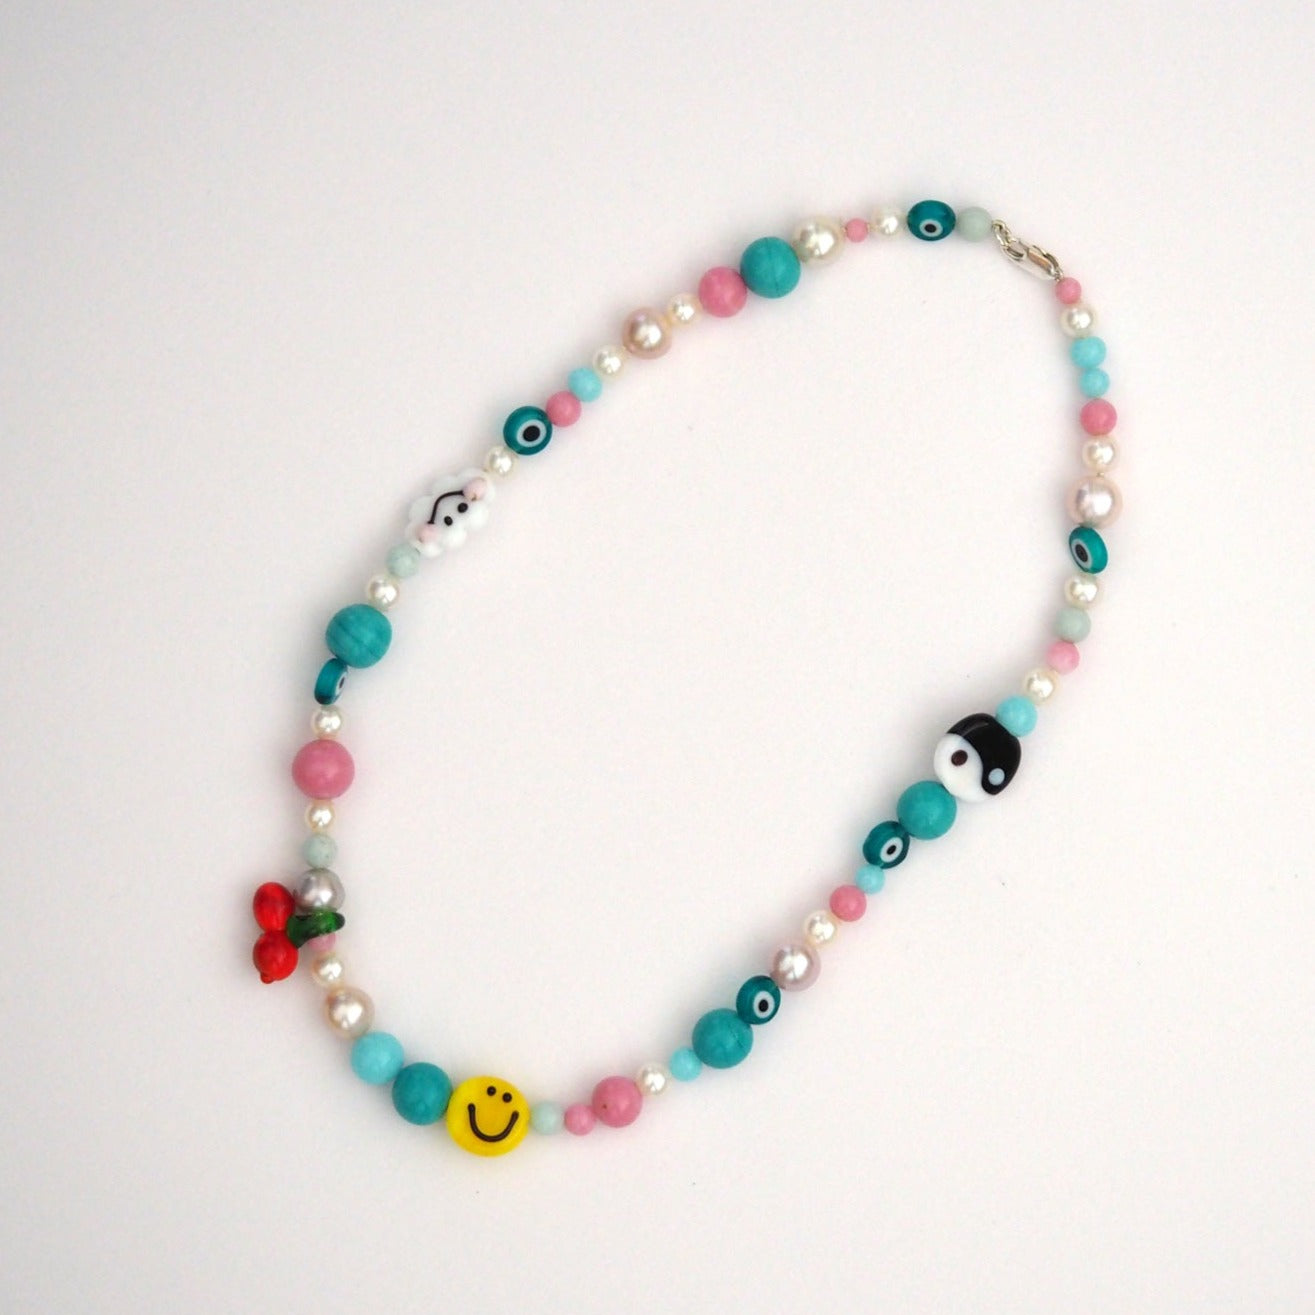 Summer Bead Necklace - Waiting List Available